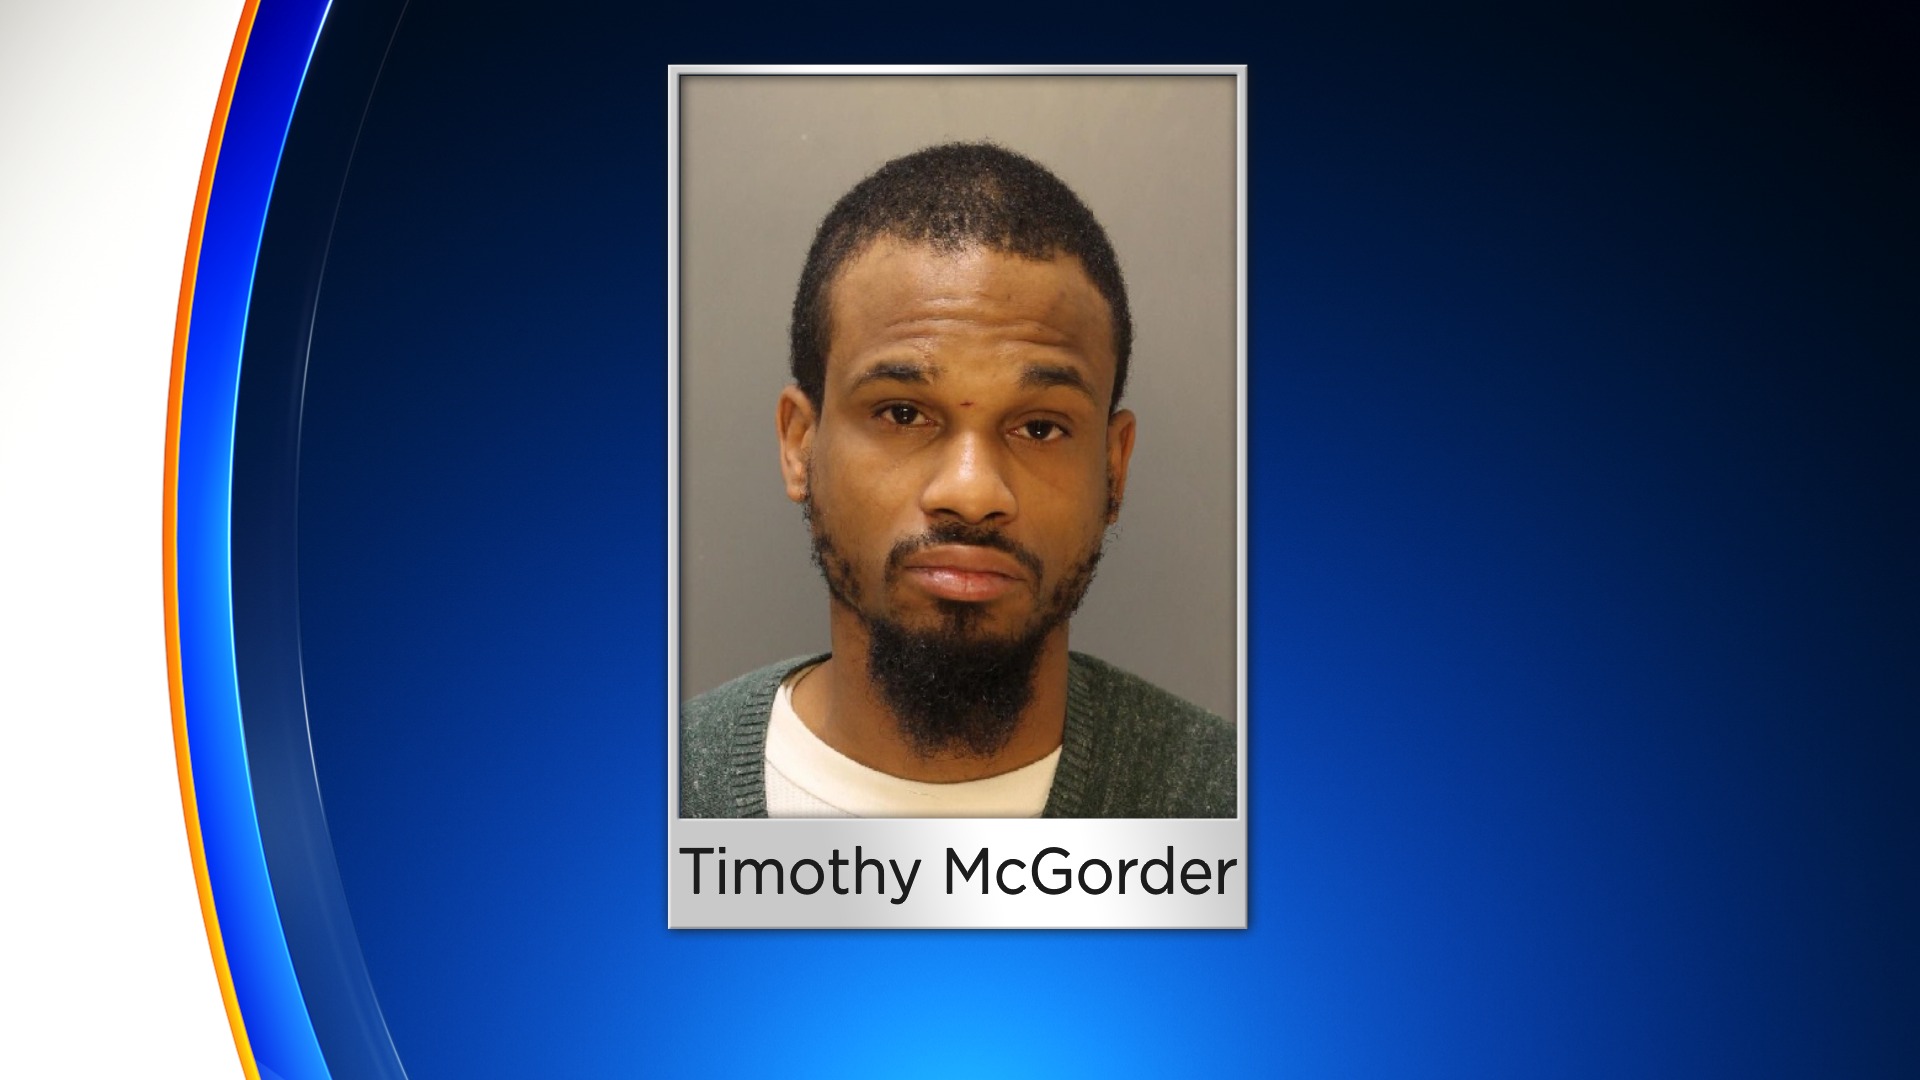 Police: Man Charged With Attempted Murder After Shooting Ex-Girlfriend In Face Outside Day Care In Overbrook